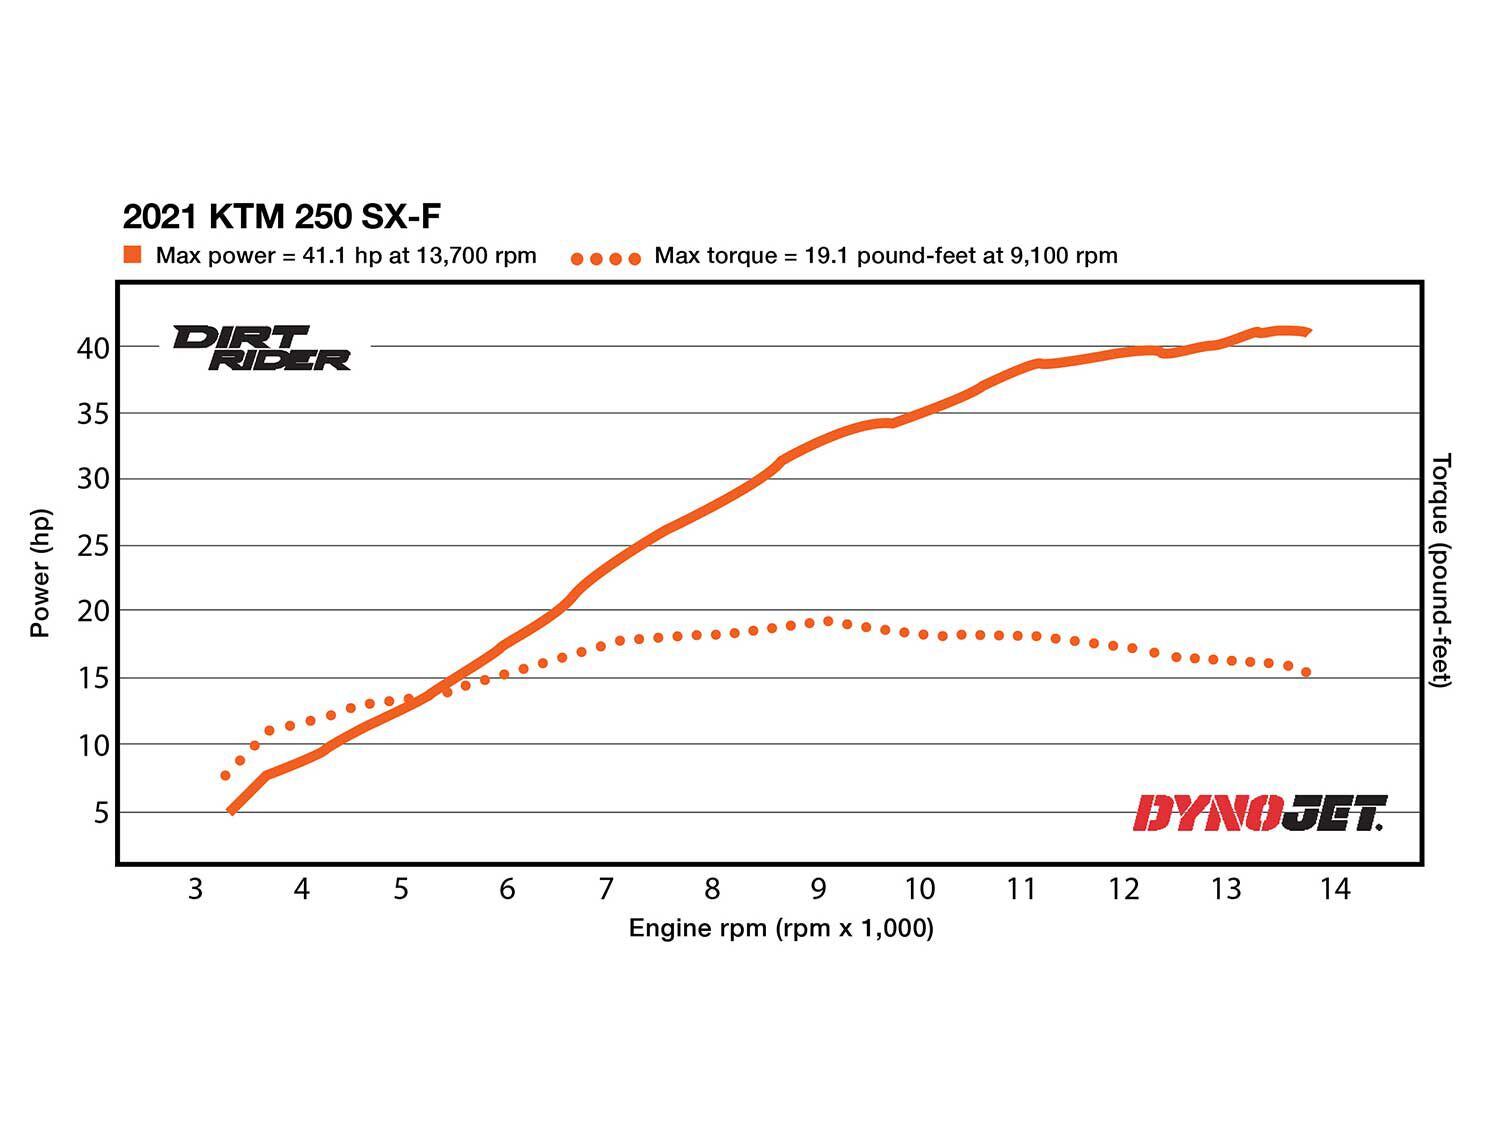 The KTM is the king of the dyno in the 250 four-stroke motocross bike segment once again. Its 41.1 hp at 13,700 rpm is the highest peak figure in the class, while 19.1 pound-feet of torque at 9,100 rpm puts the orange machine at just 0.2 pound-feet less at peak than the Husqvarna FC 250.